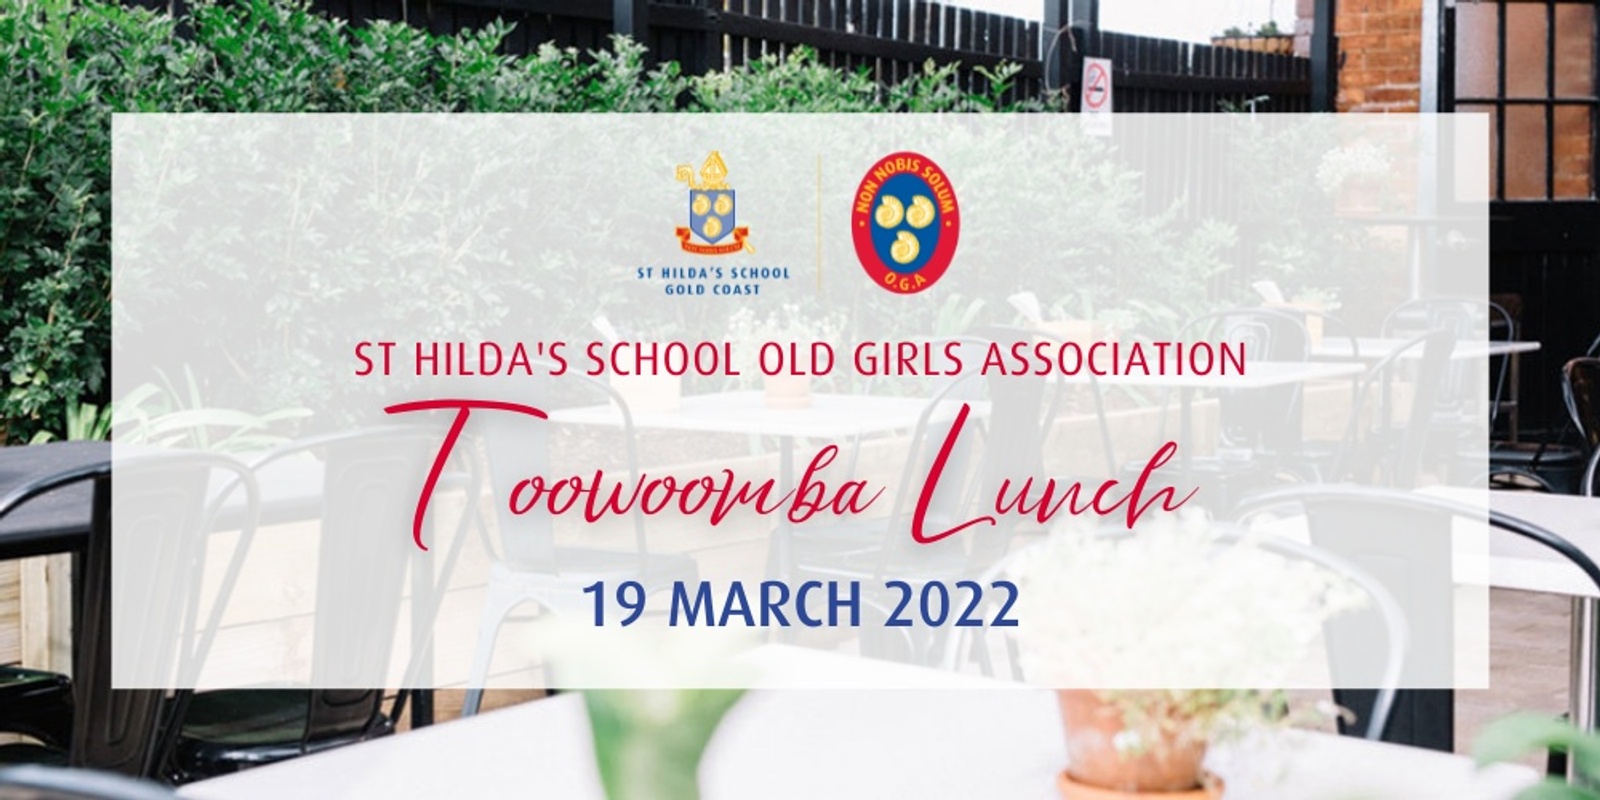 Banner image for St Hilda's School Old Girls Toowoomba Lunch